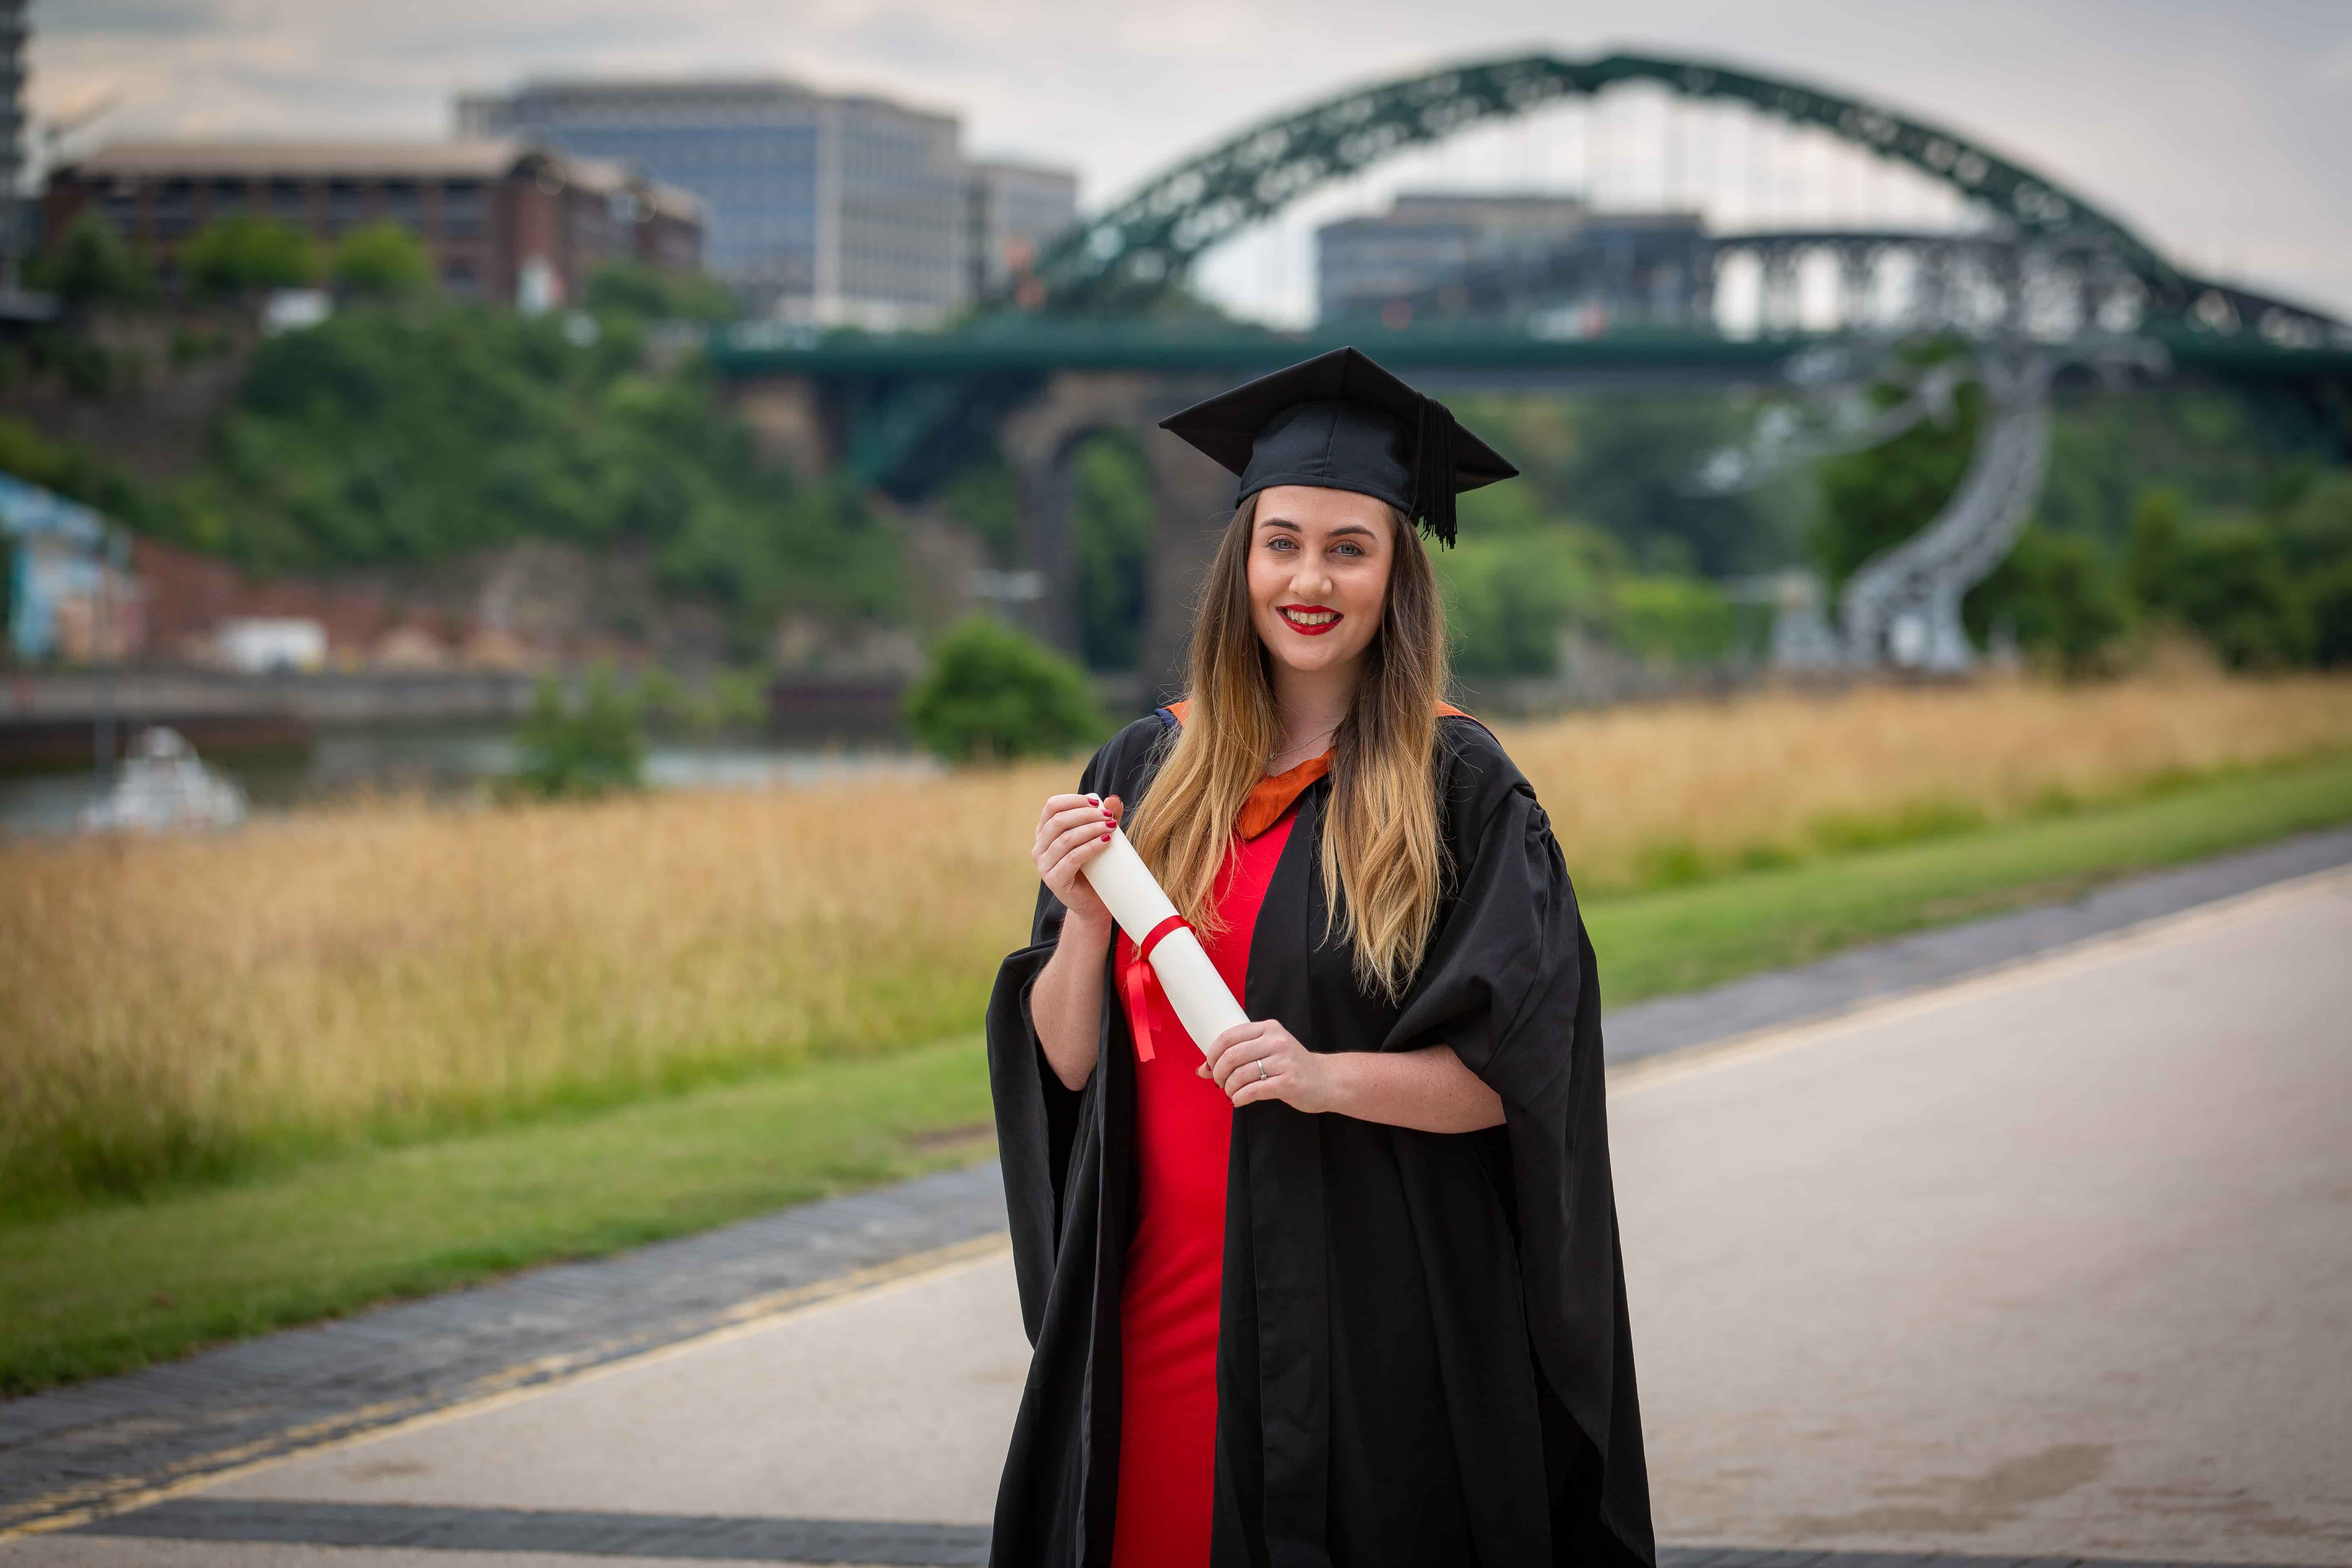 Cheria Law, a we care student, graduating from the University of Sunderland